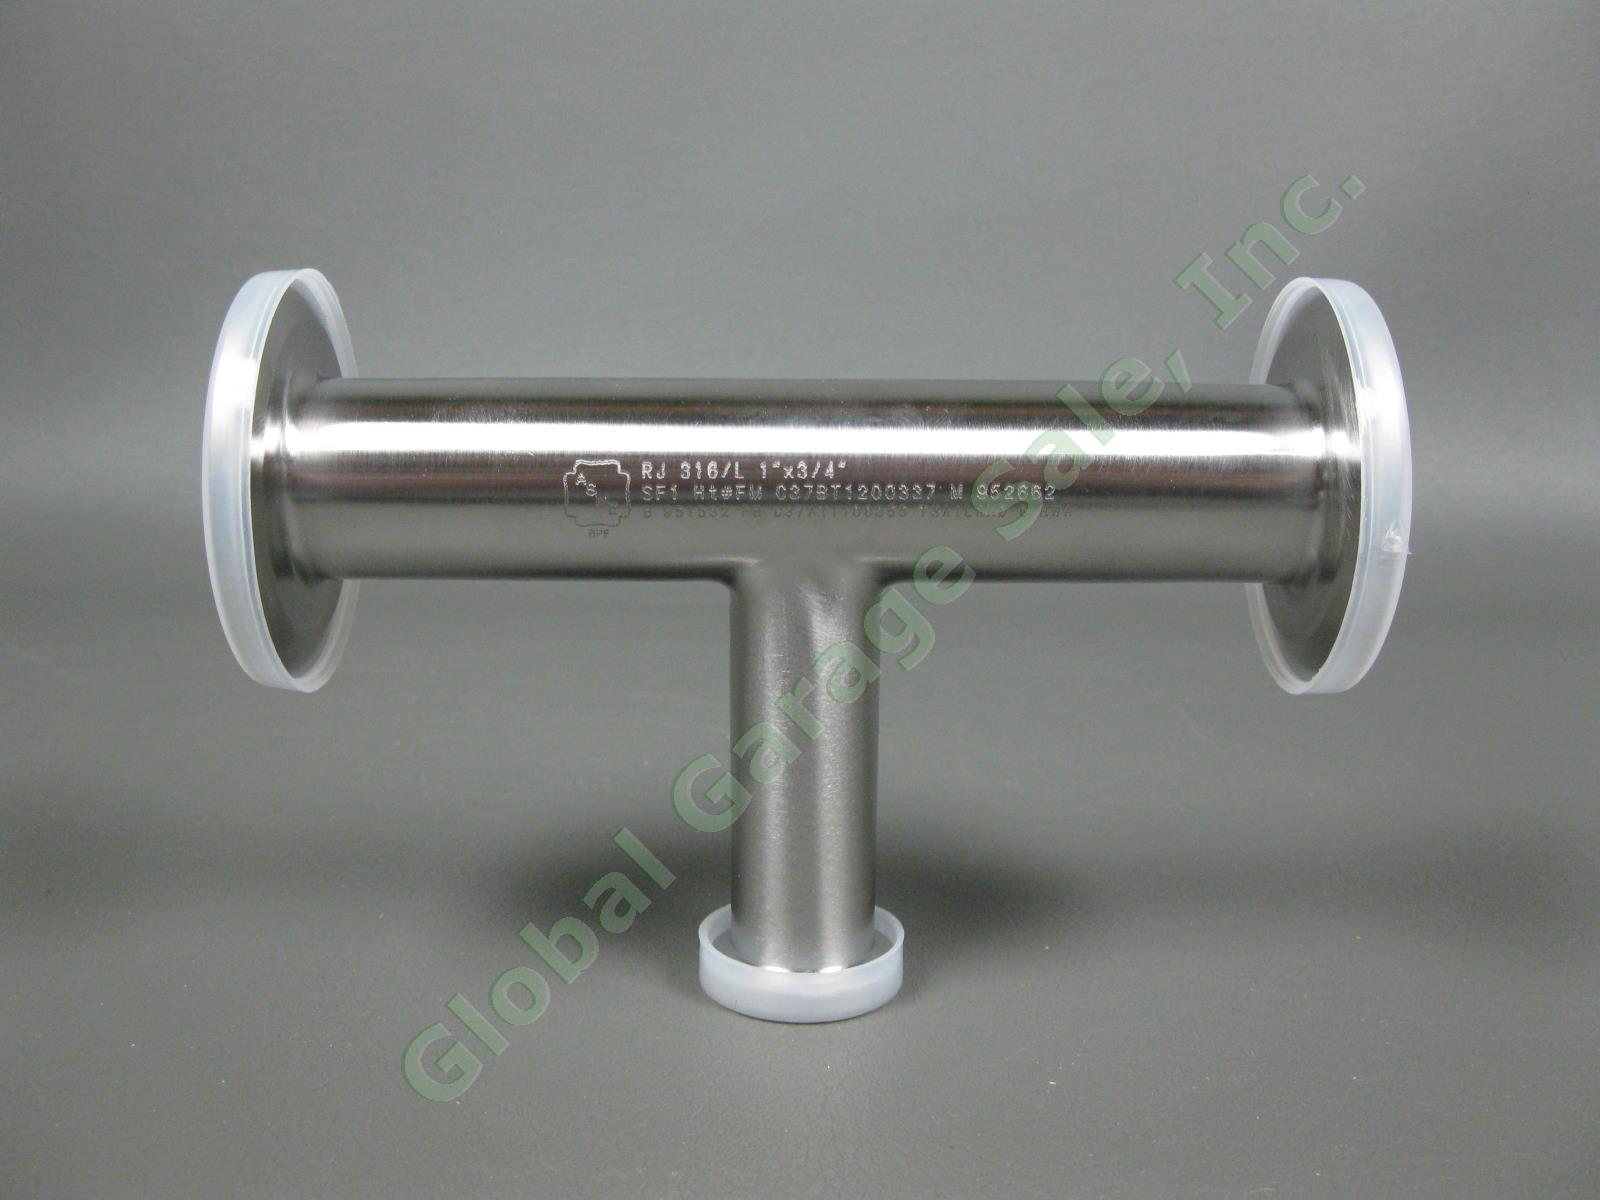 BPE DT-19 1" x 3/4" Sanitary 316L Stainless Steel Reducing Tee Fitting Clamp End